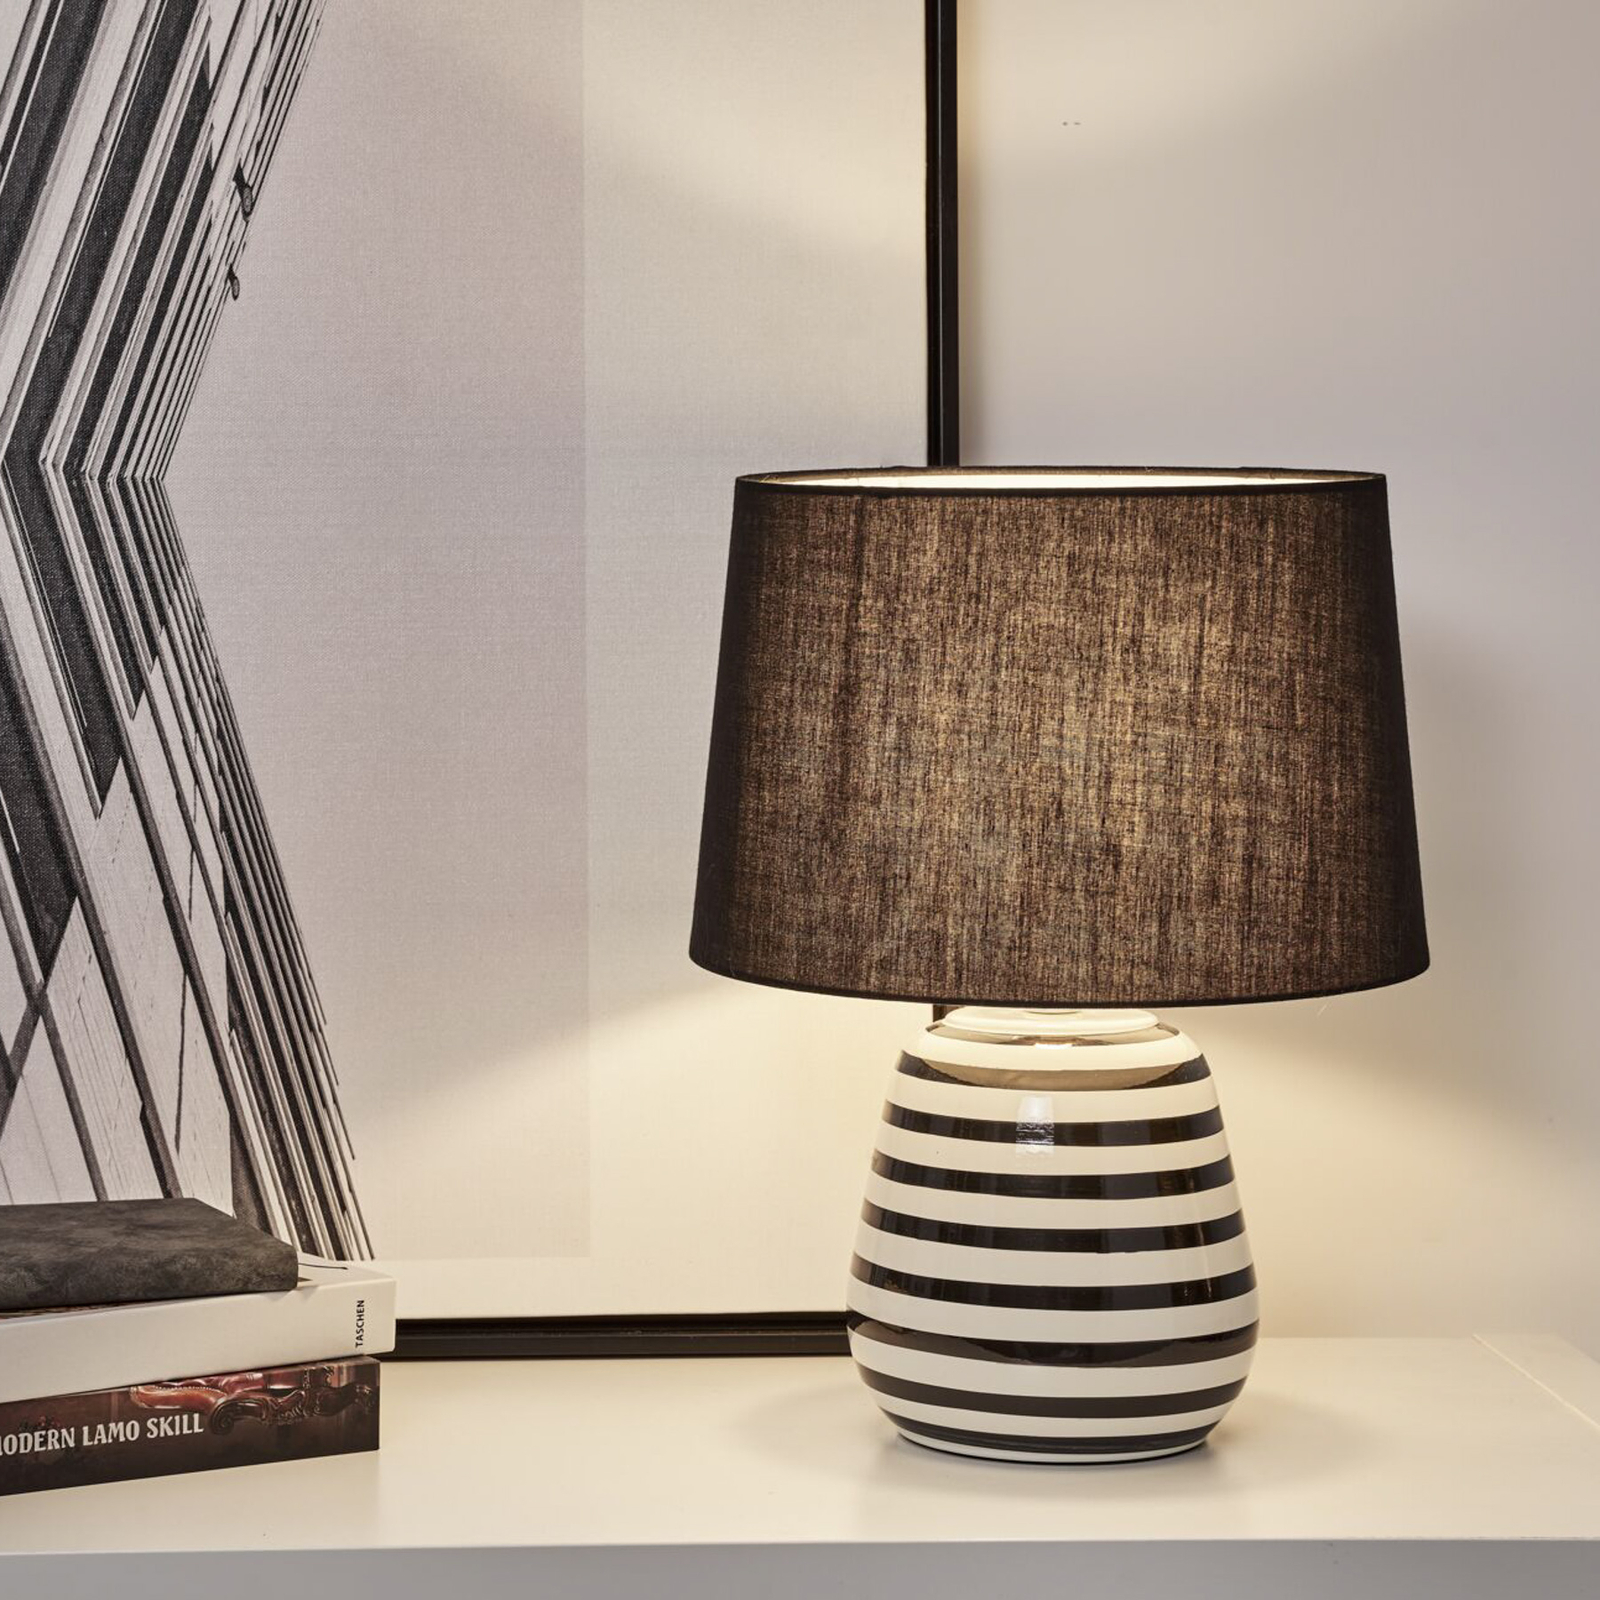 Pauleen Dressy Sparkle table lamp in striped look